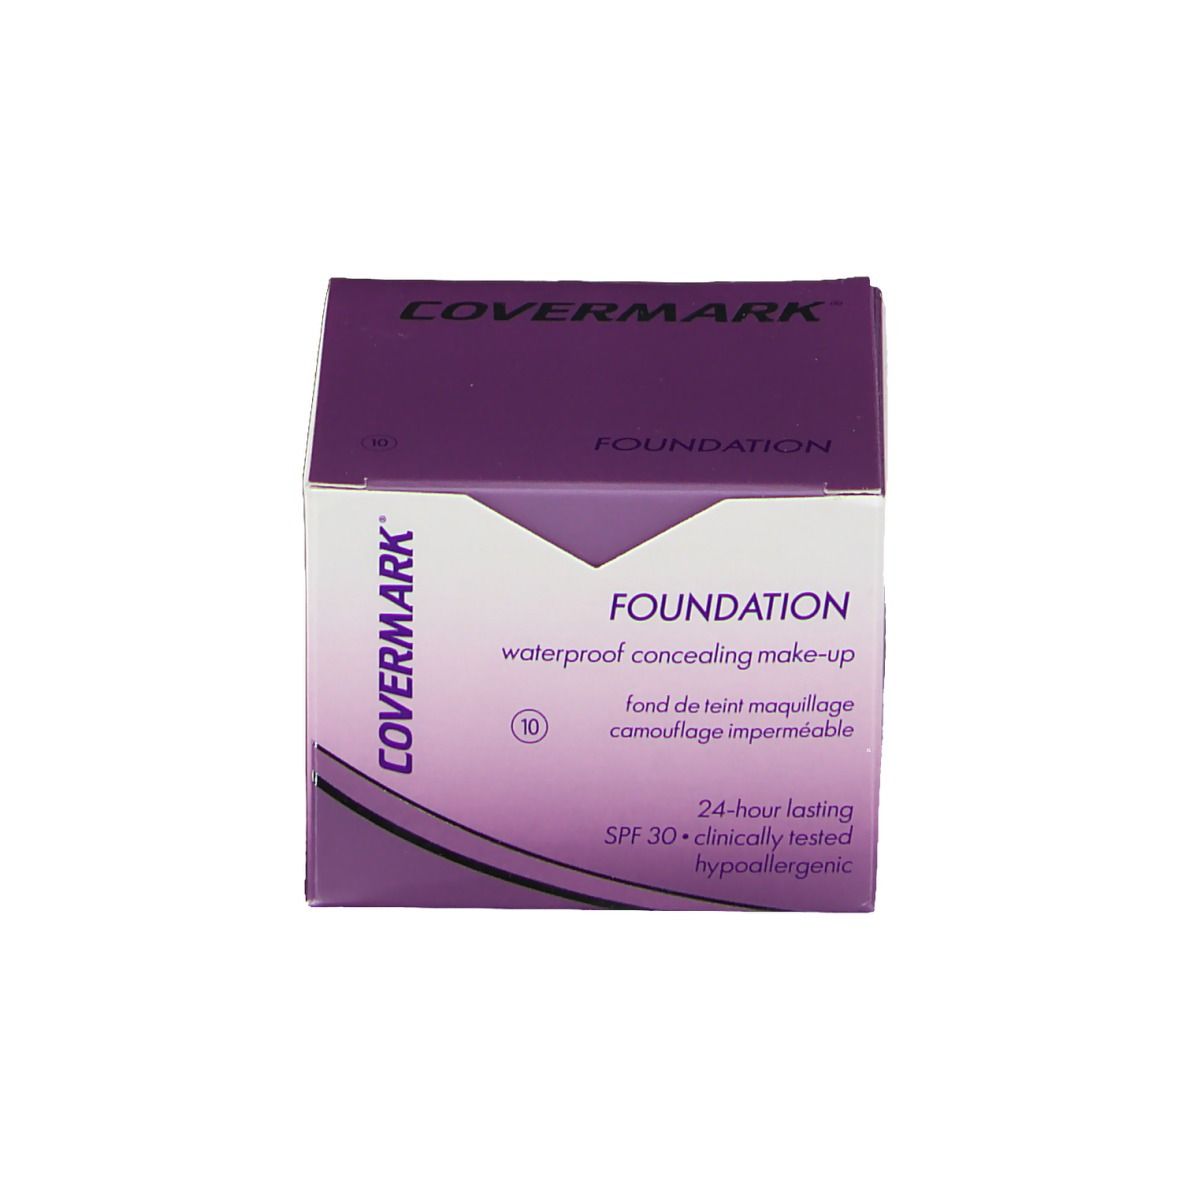 Covermark Classic Foundation Nr10 White